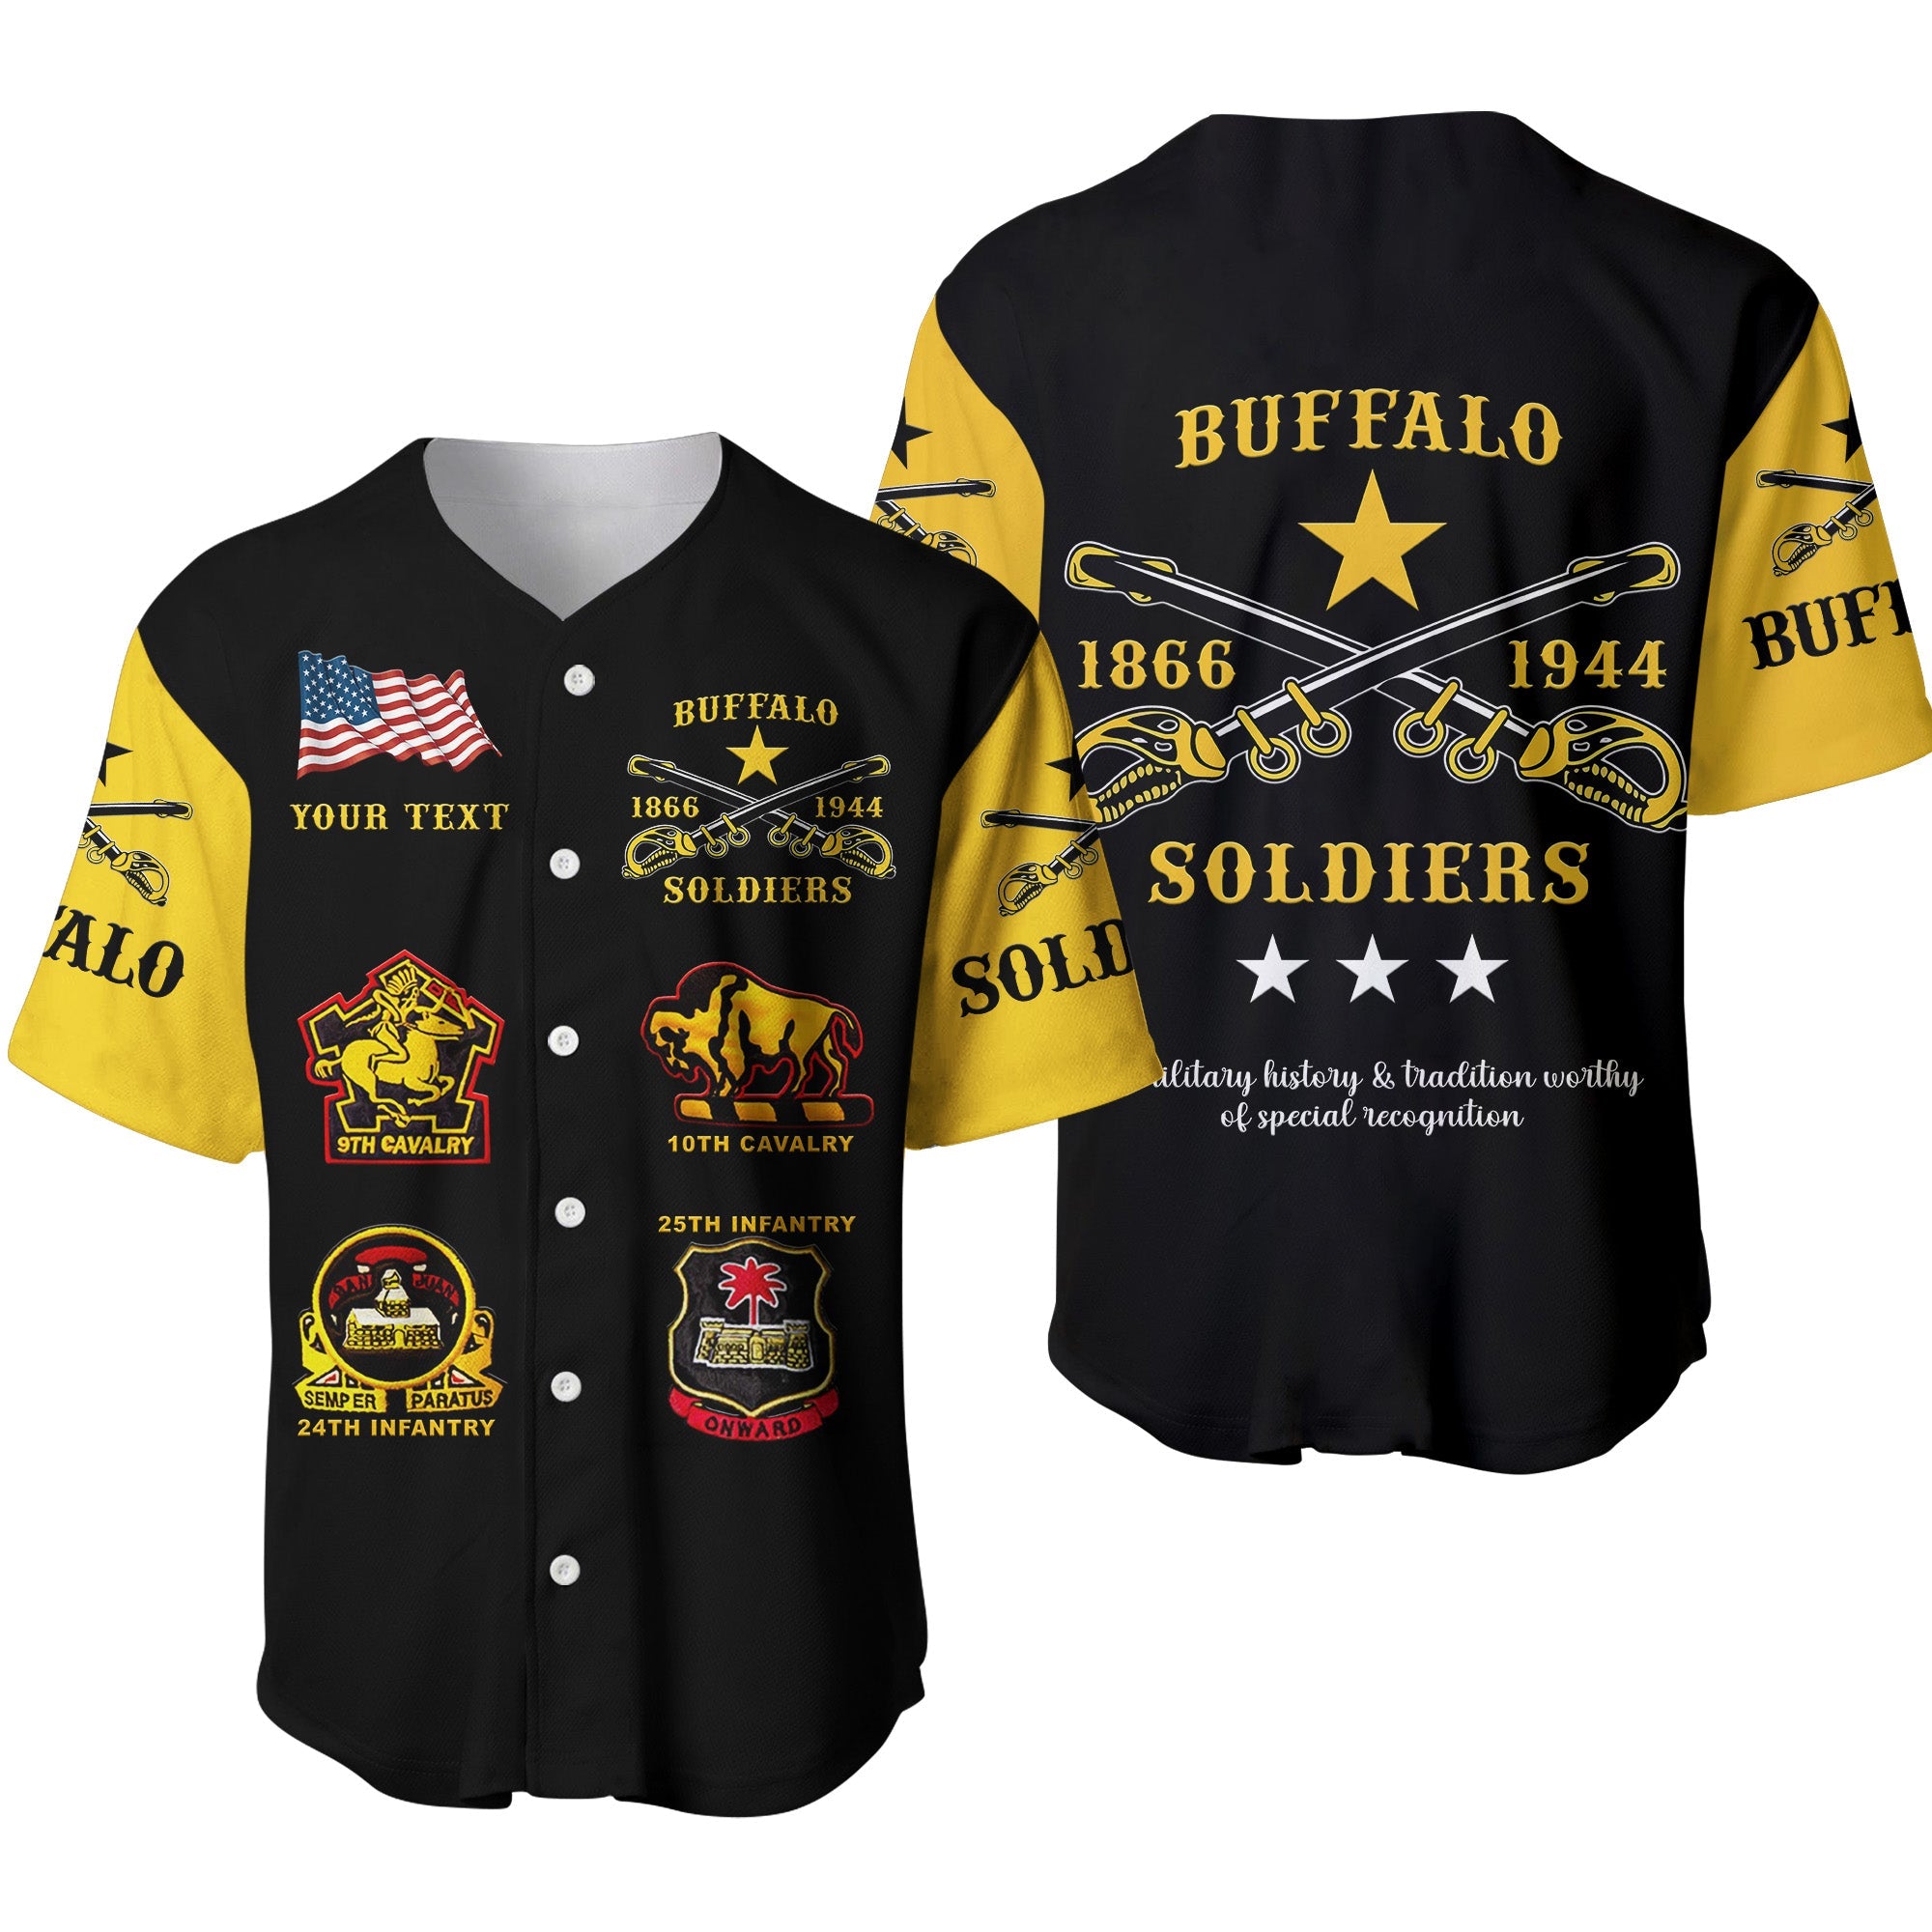 custom-personalised-buffalo-soldiers-baseball-jersey-african-american-military-original-style-black-gold